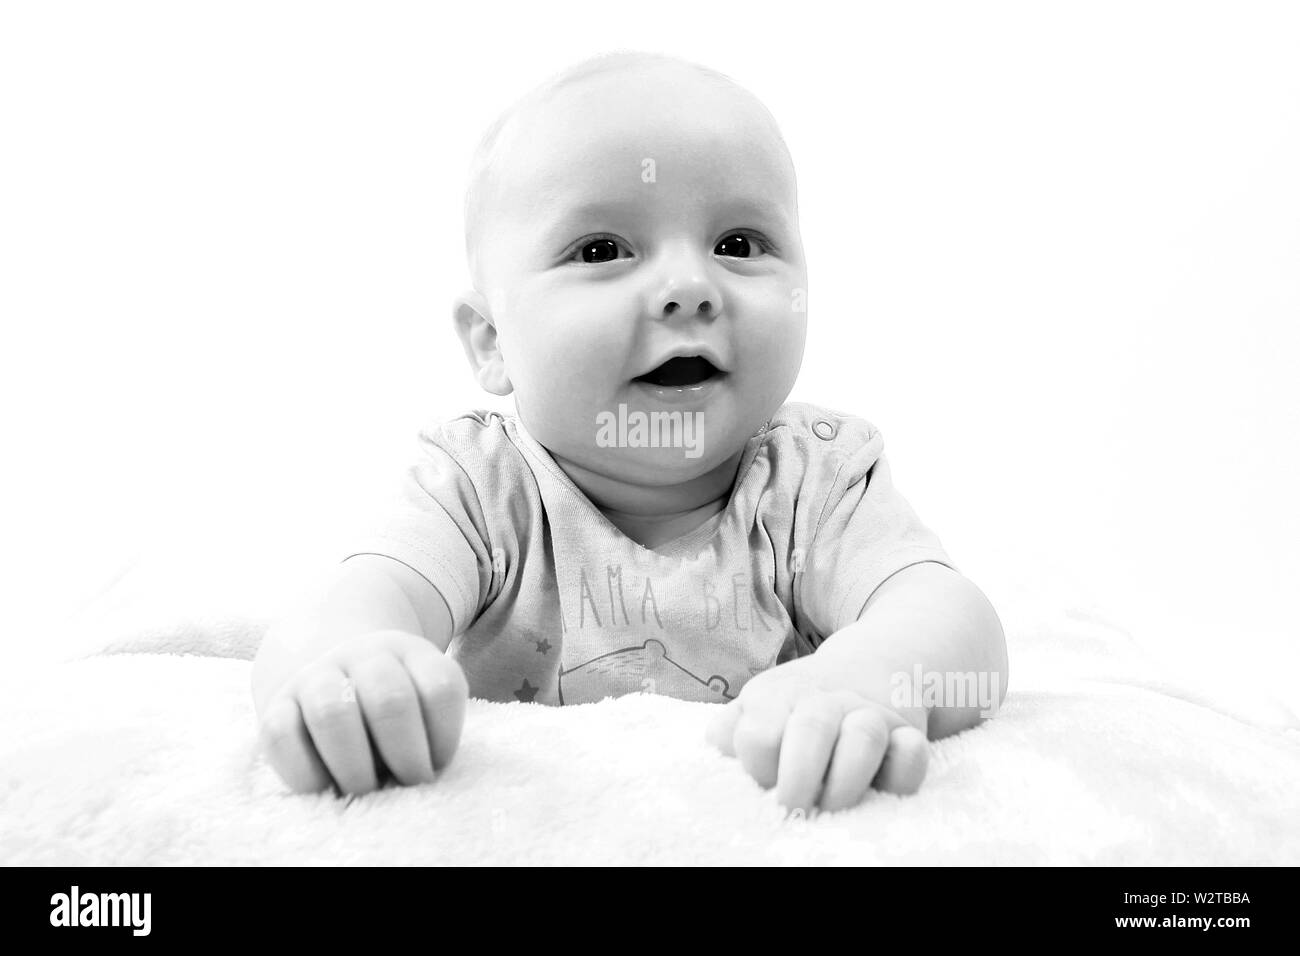 happy 5 month old baby boy Stock Photo